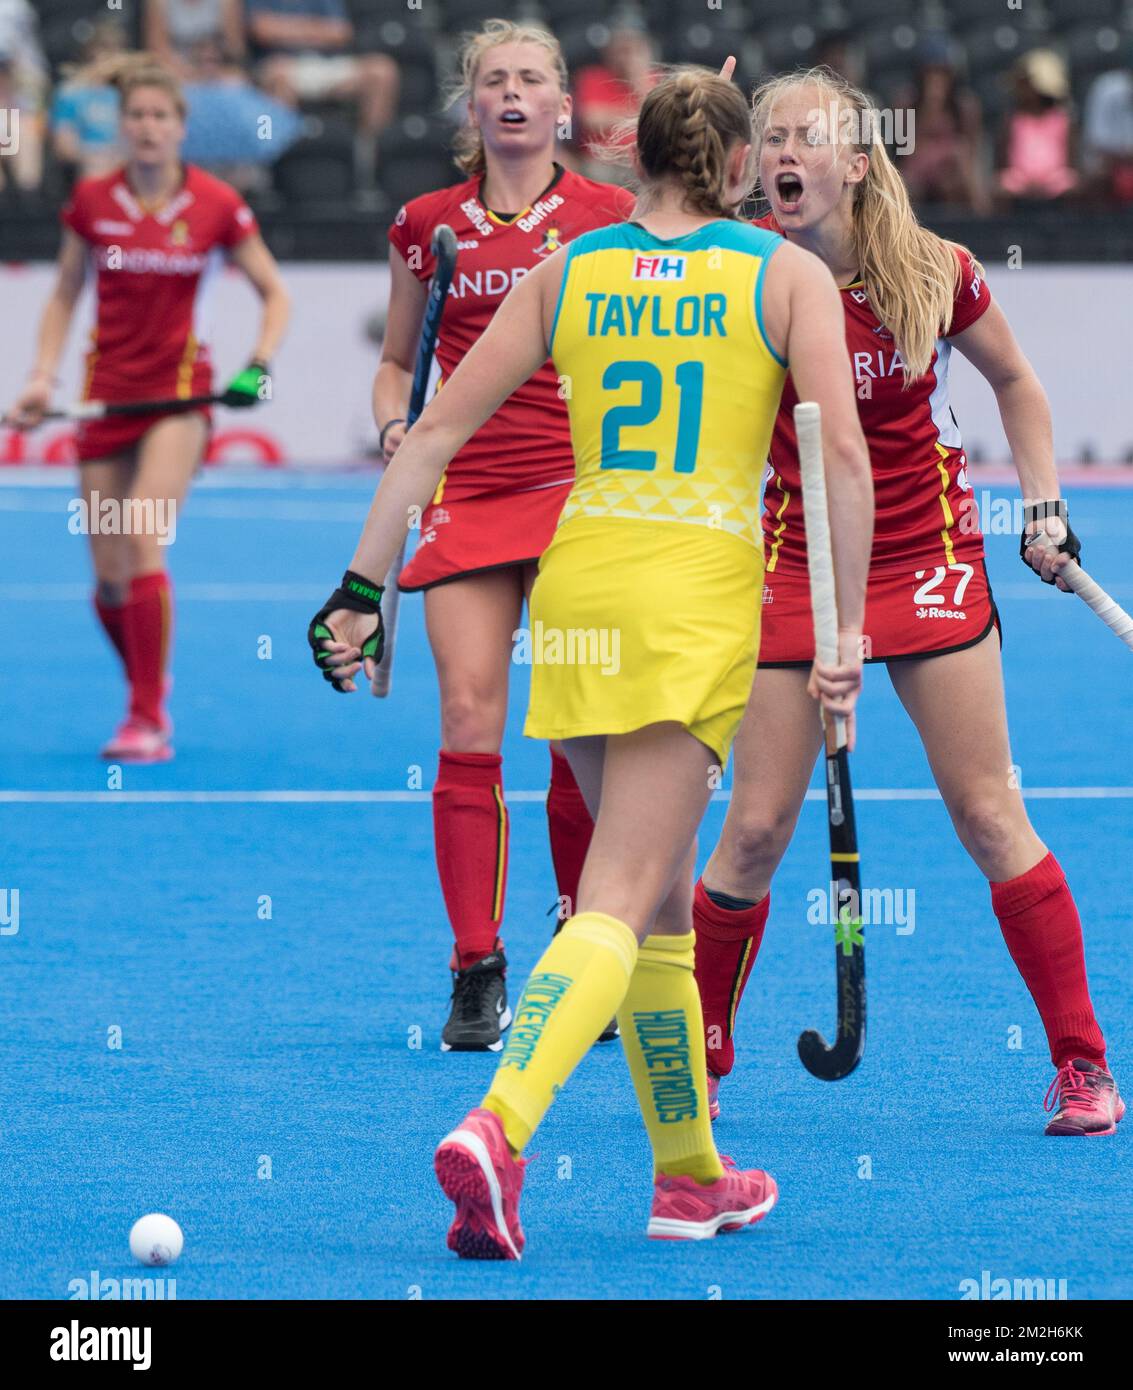 Australia's Renee Taylor and Belgium's Jill Boon react during the game between Australia and Belgium in group D at the Hockey Women's World Cup, in London, UK, Tuesday 24 July 2018. The Hockey Women's World Cup takes place from 21 July to 05 August at the Lee Valley Hockey Centre in London. BELGA PHOTO BENOIT DOPPAGNE  Stock Photo